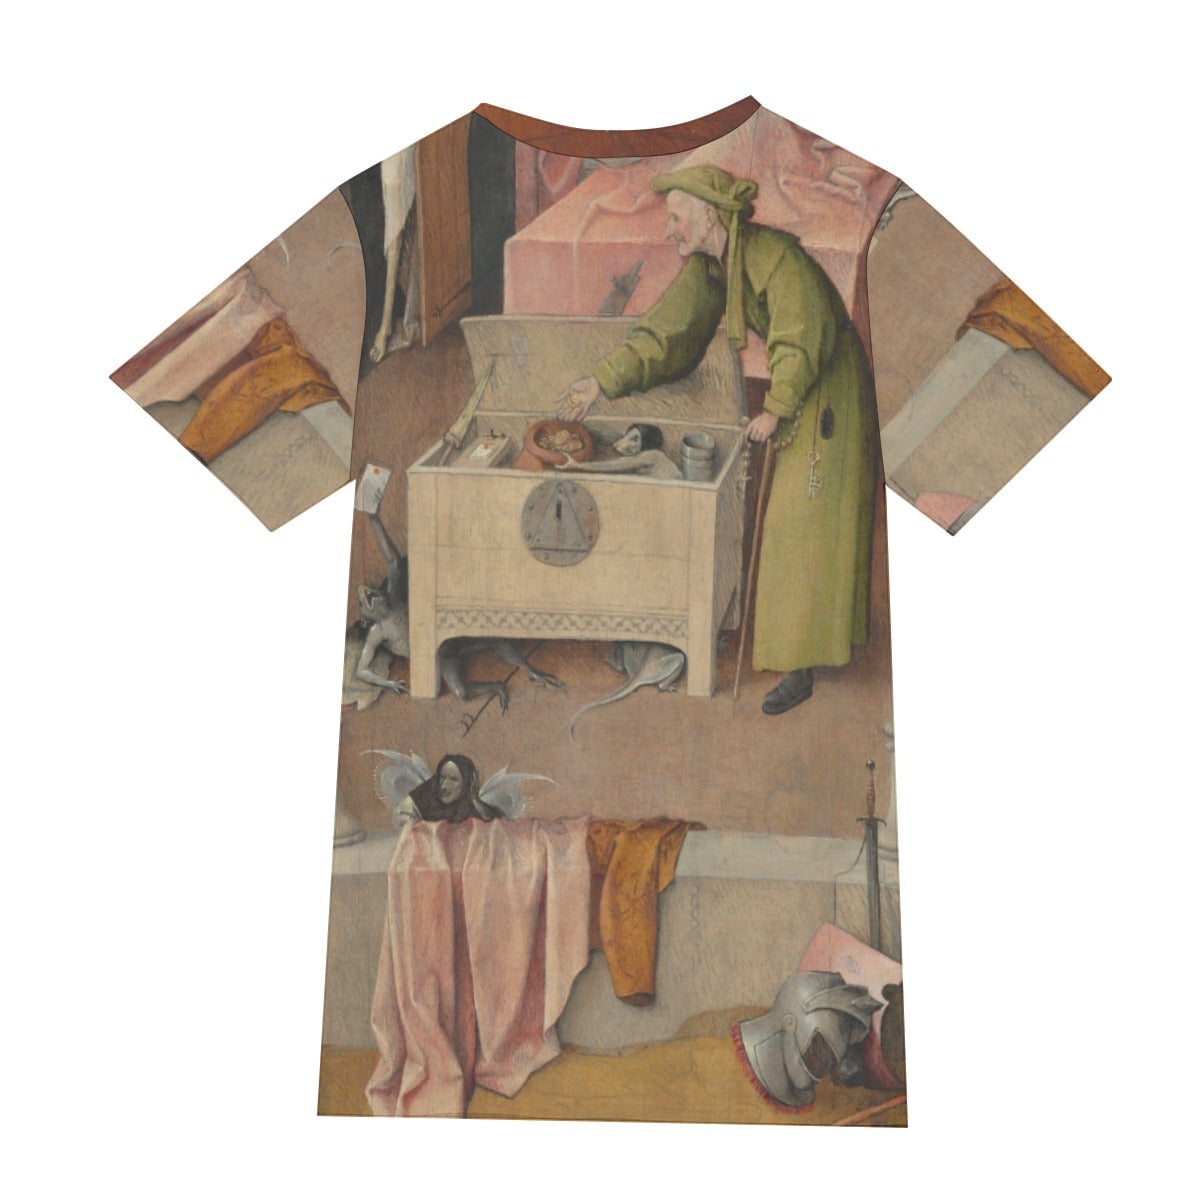 Hieronymus Bosch’s Death and the Miser T-Shirt